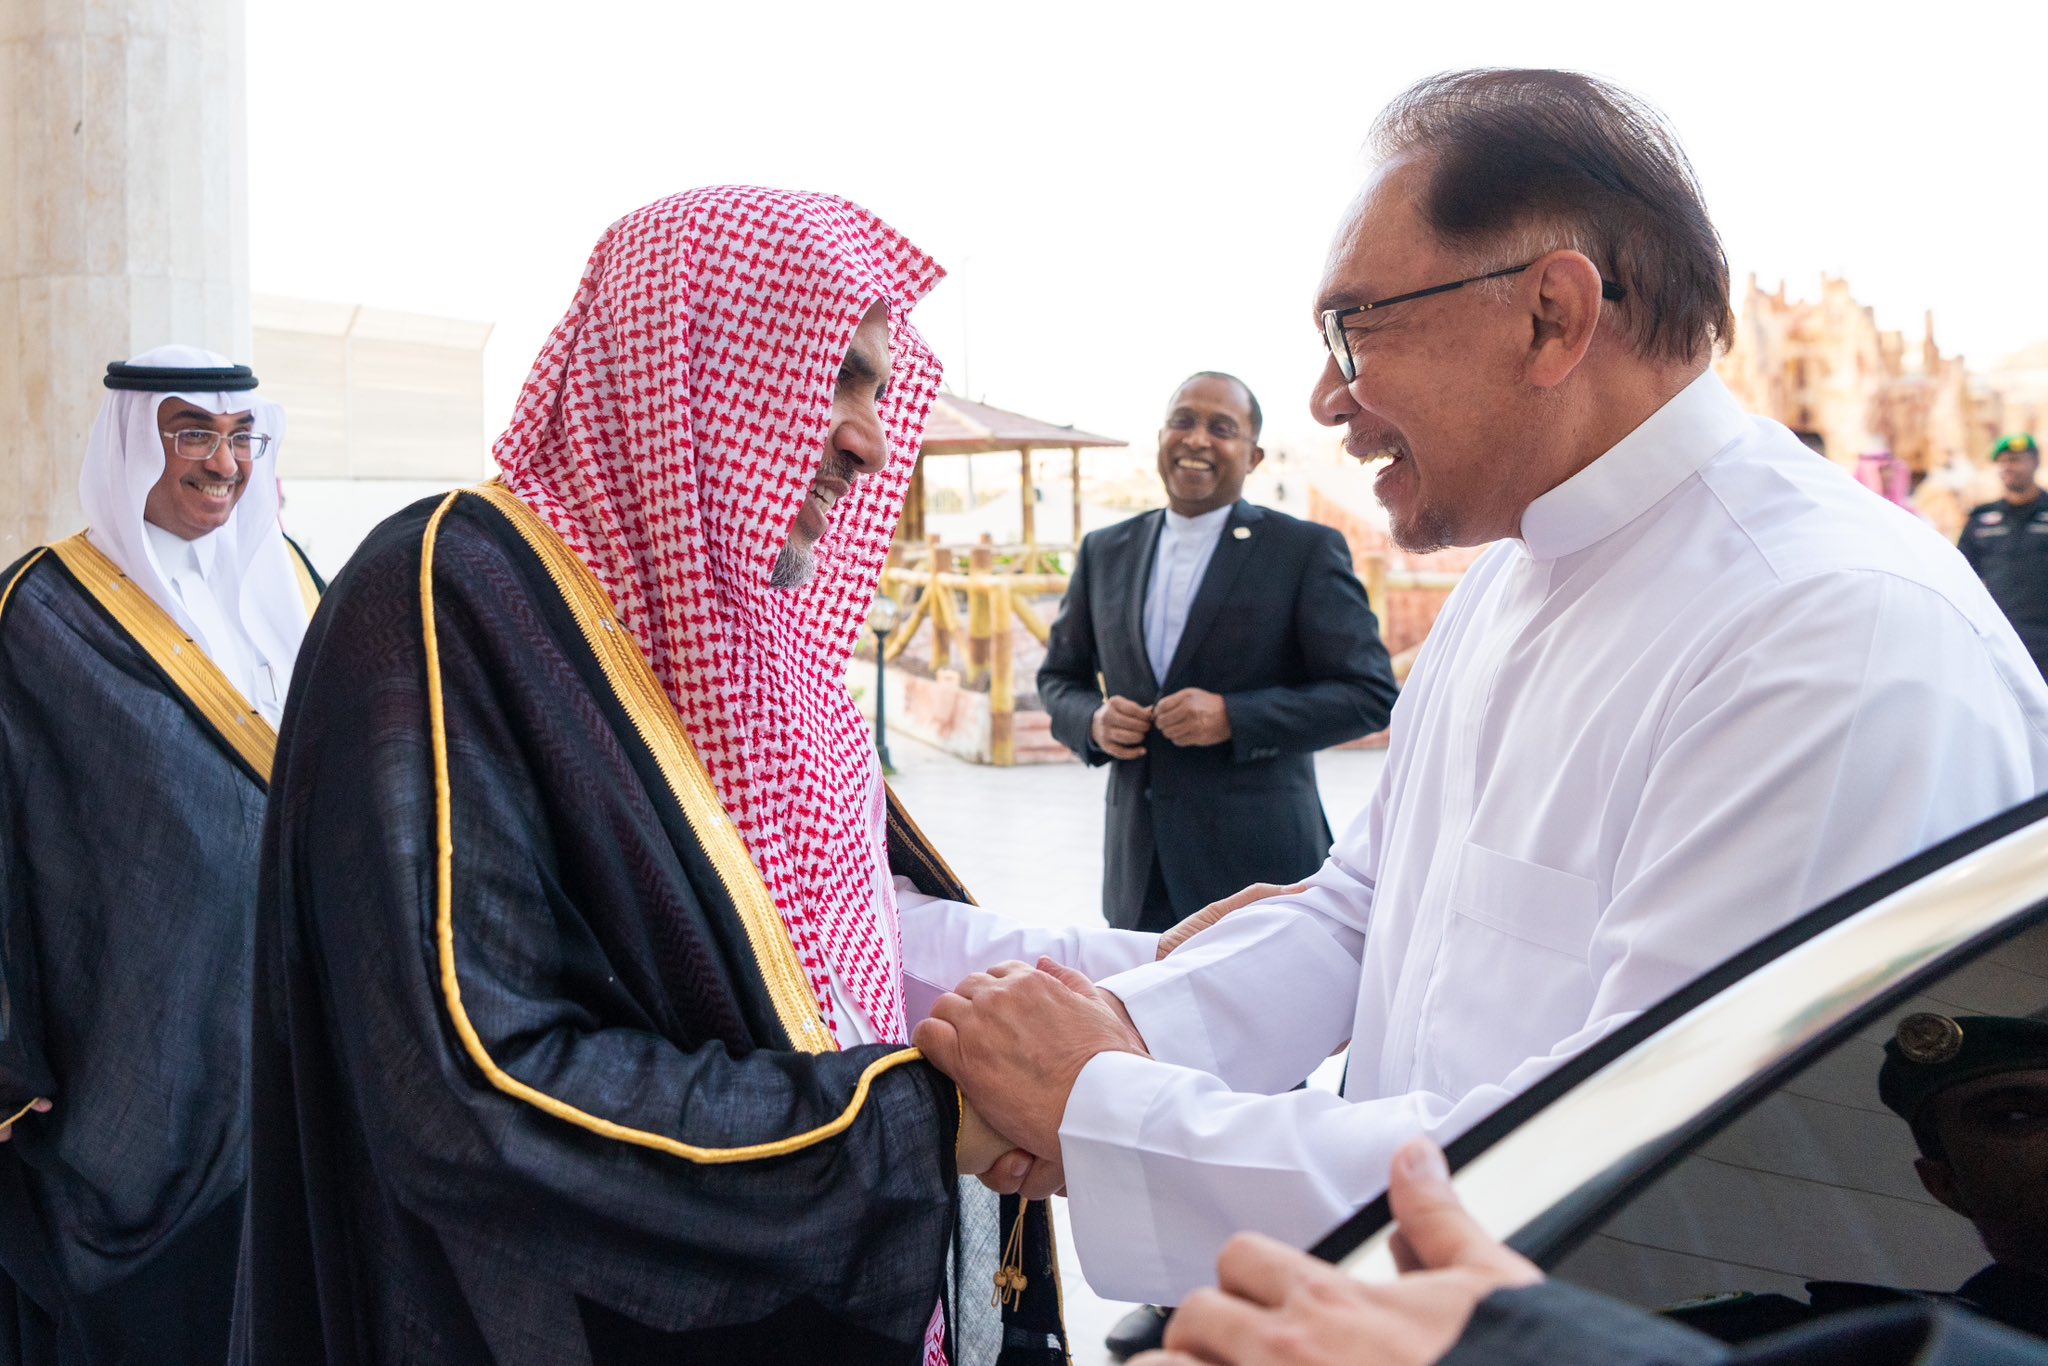 At the SG's Home in Makkah, HE Mr. Anwar ibrahim, the PM of Malaysia visited HE Dr. Al-Issa